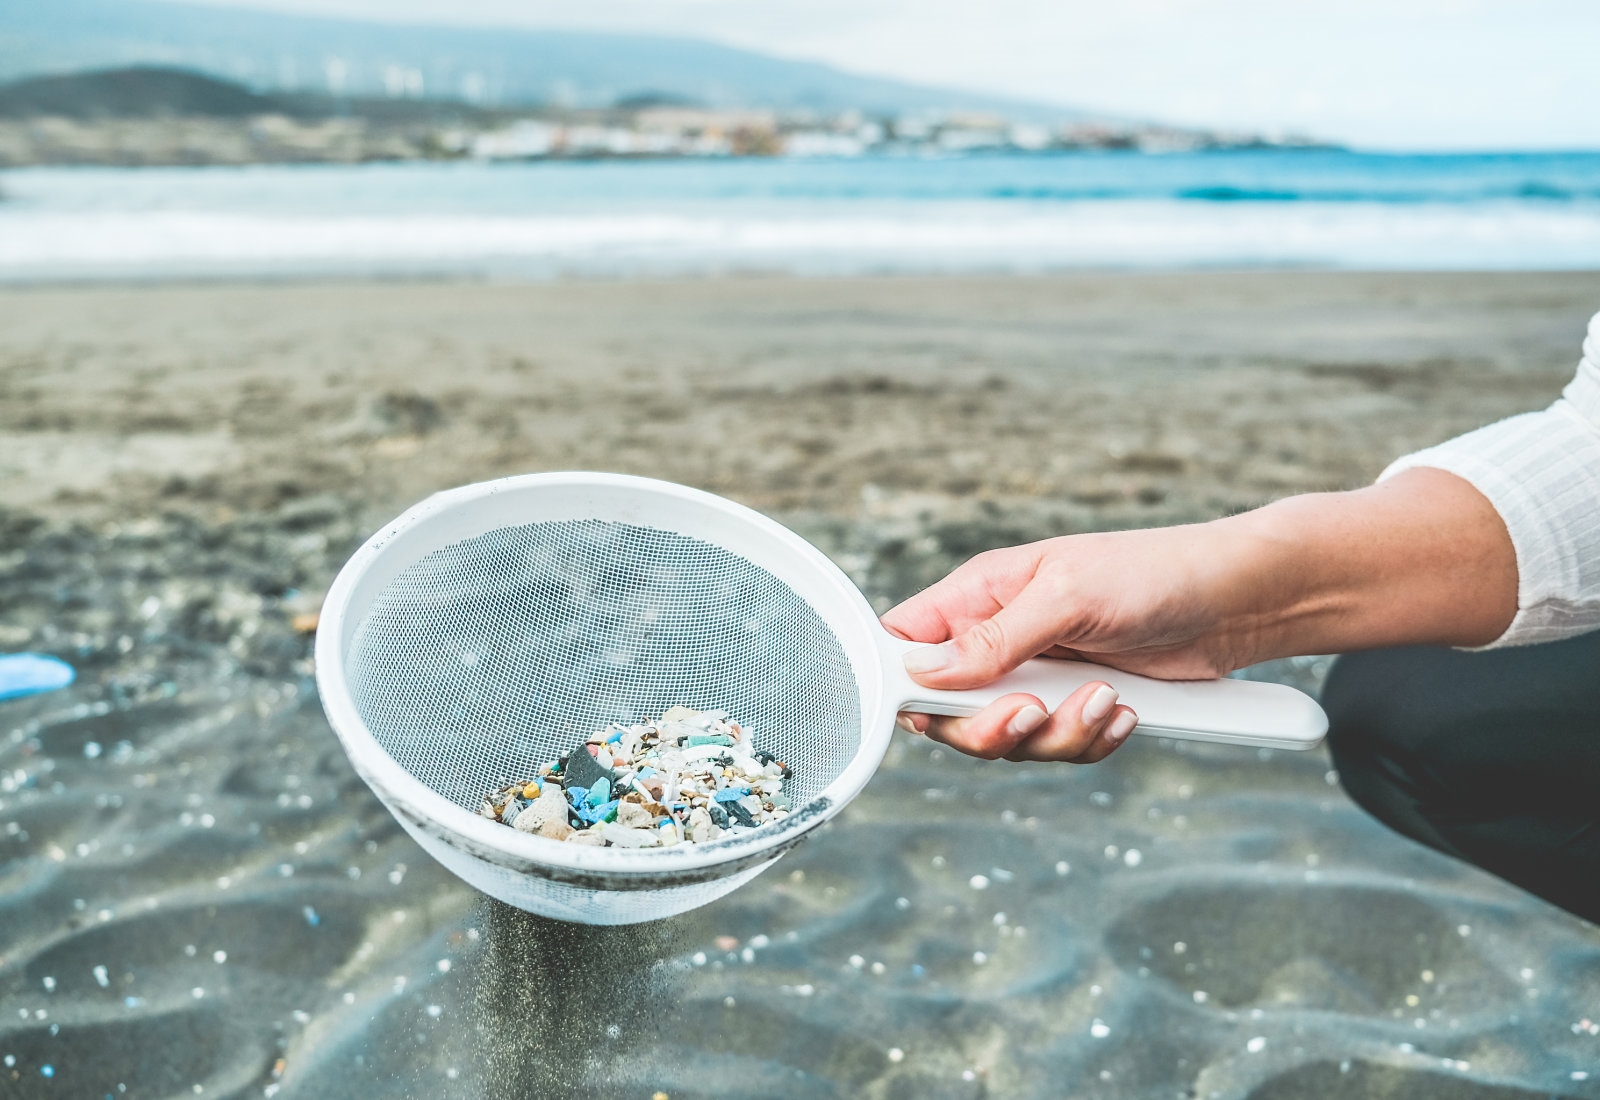 Americans consume an alarming amount of microplastics | DeviceDaily.com